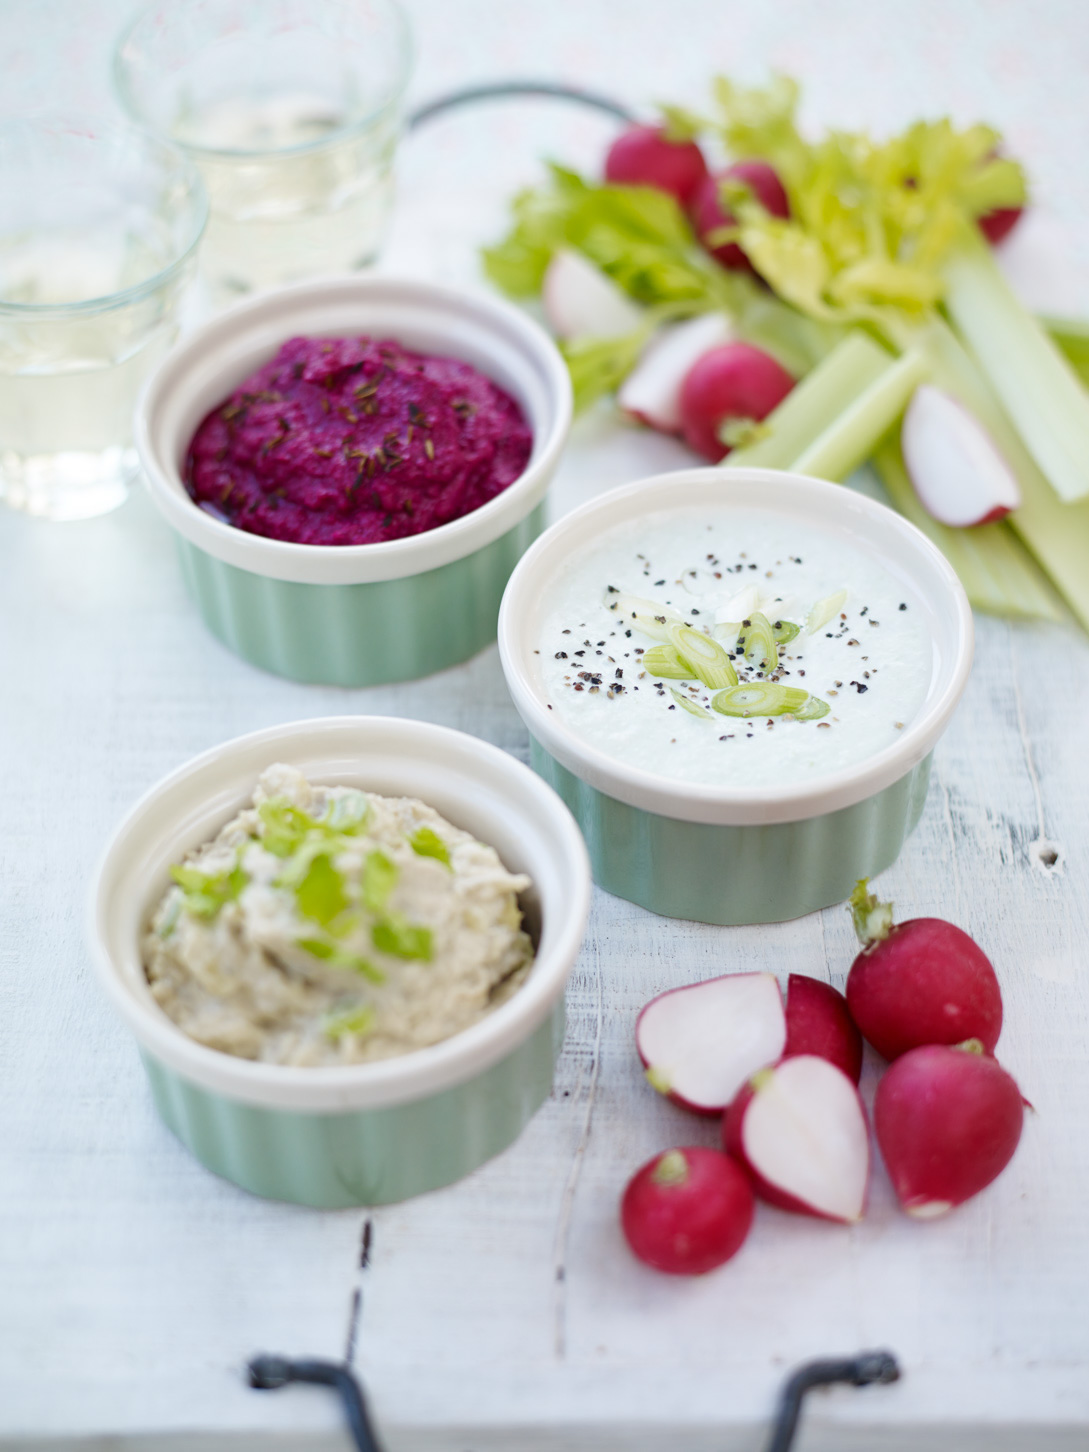 Spring onion, celery and Roquefort dip - Love The Crunch